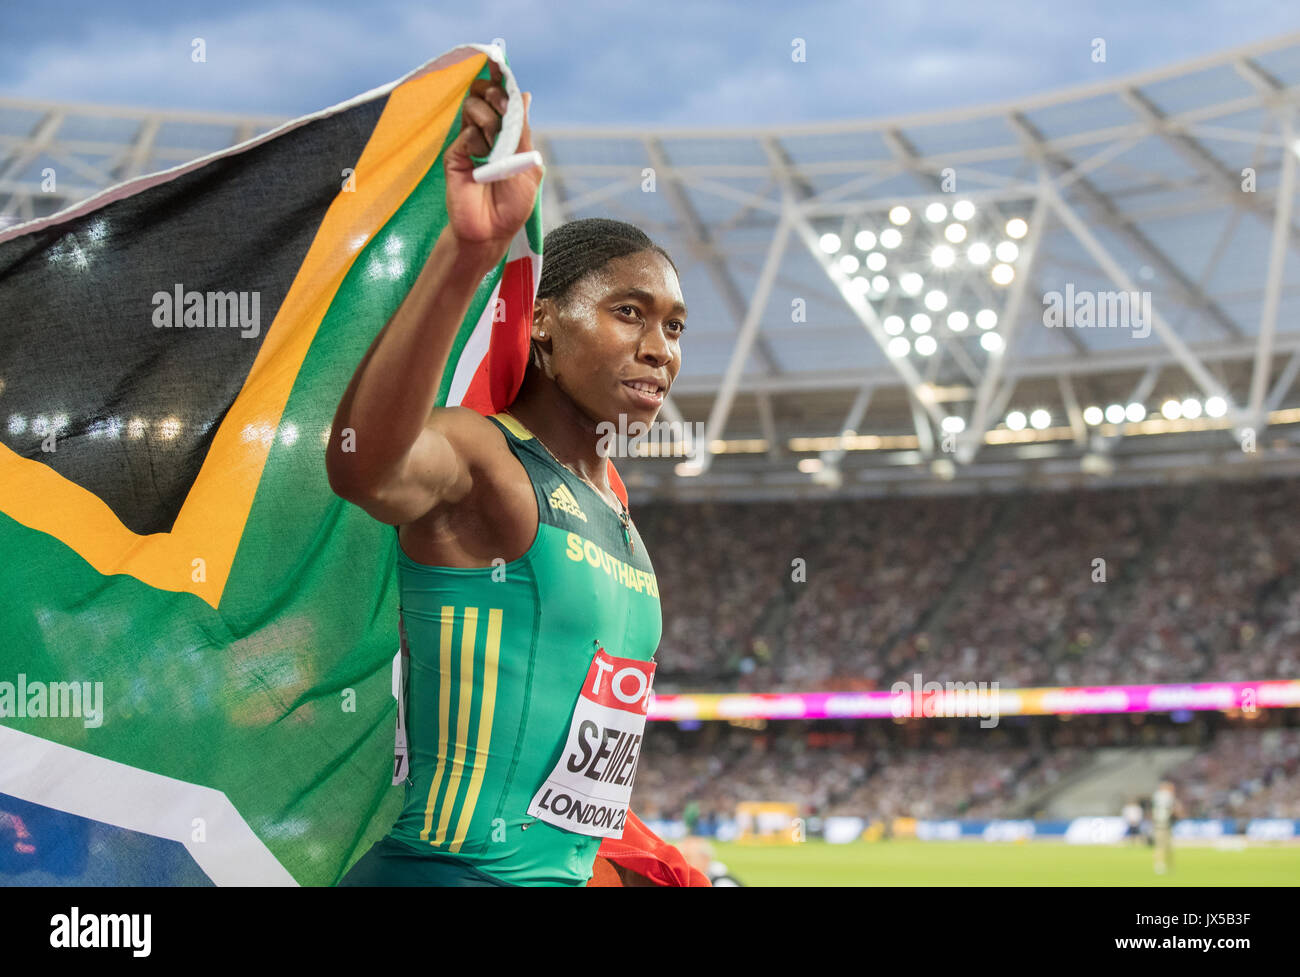 Caster SEMENYA of South Africa celebrates winning her Gold Medal in the Women's 800 metres Final during the Final Day of the IAAF World Athletics Championships (Day 10) at the Olympic Park, London, England on 13 August 2017. Photo by Andy Rowland / PRiME Media Images. Stock Photo